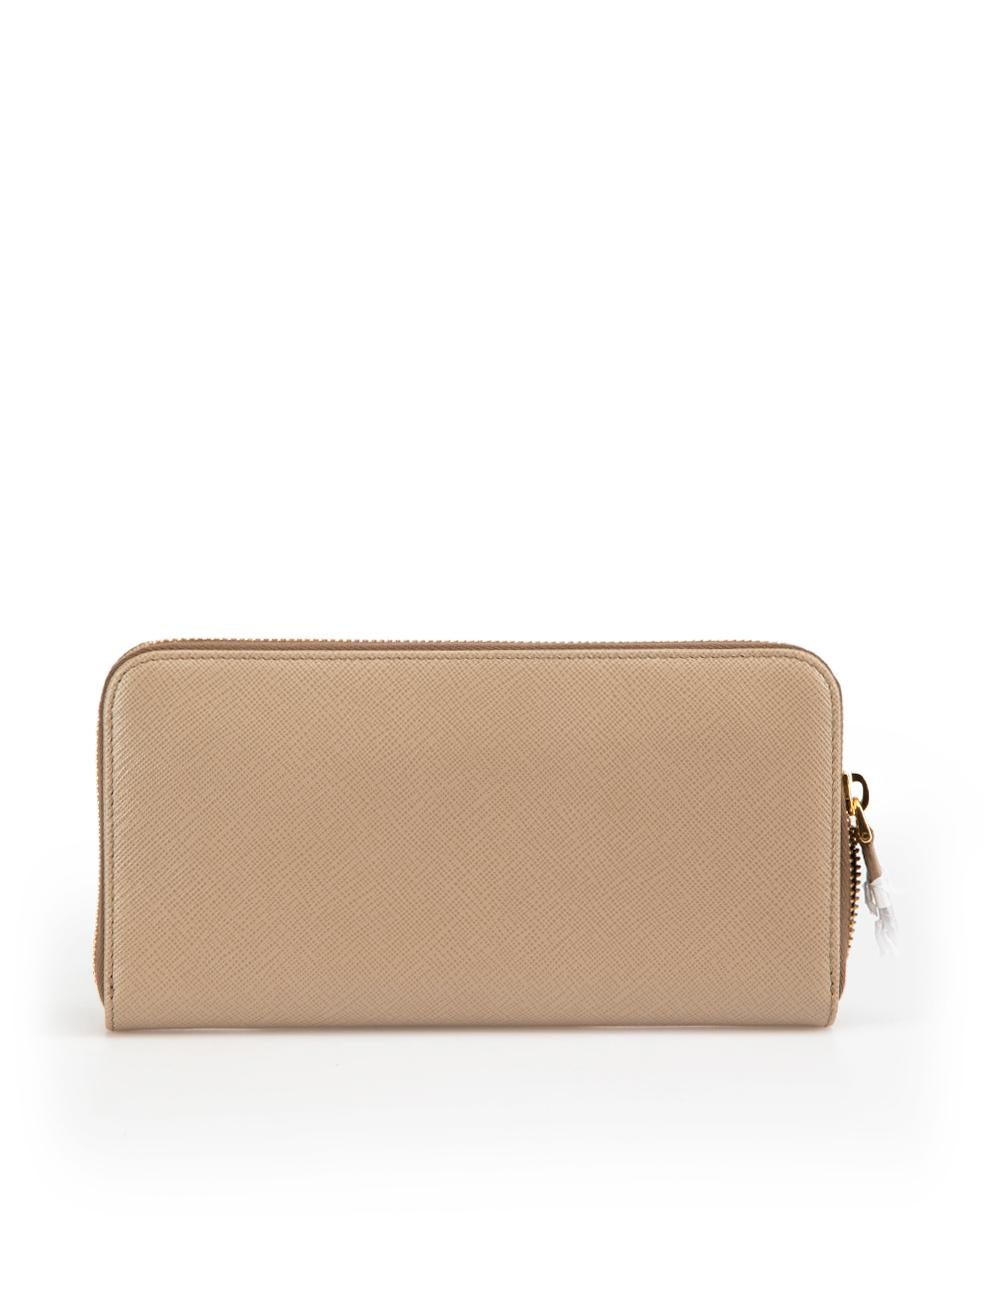 Prada Beige Saffiano Leather Zip Around Wallet In New Condition For Sale In London, GB